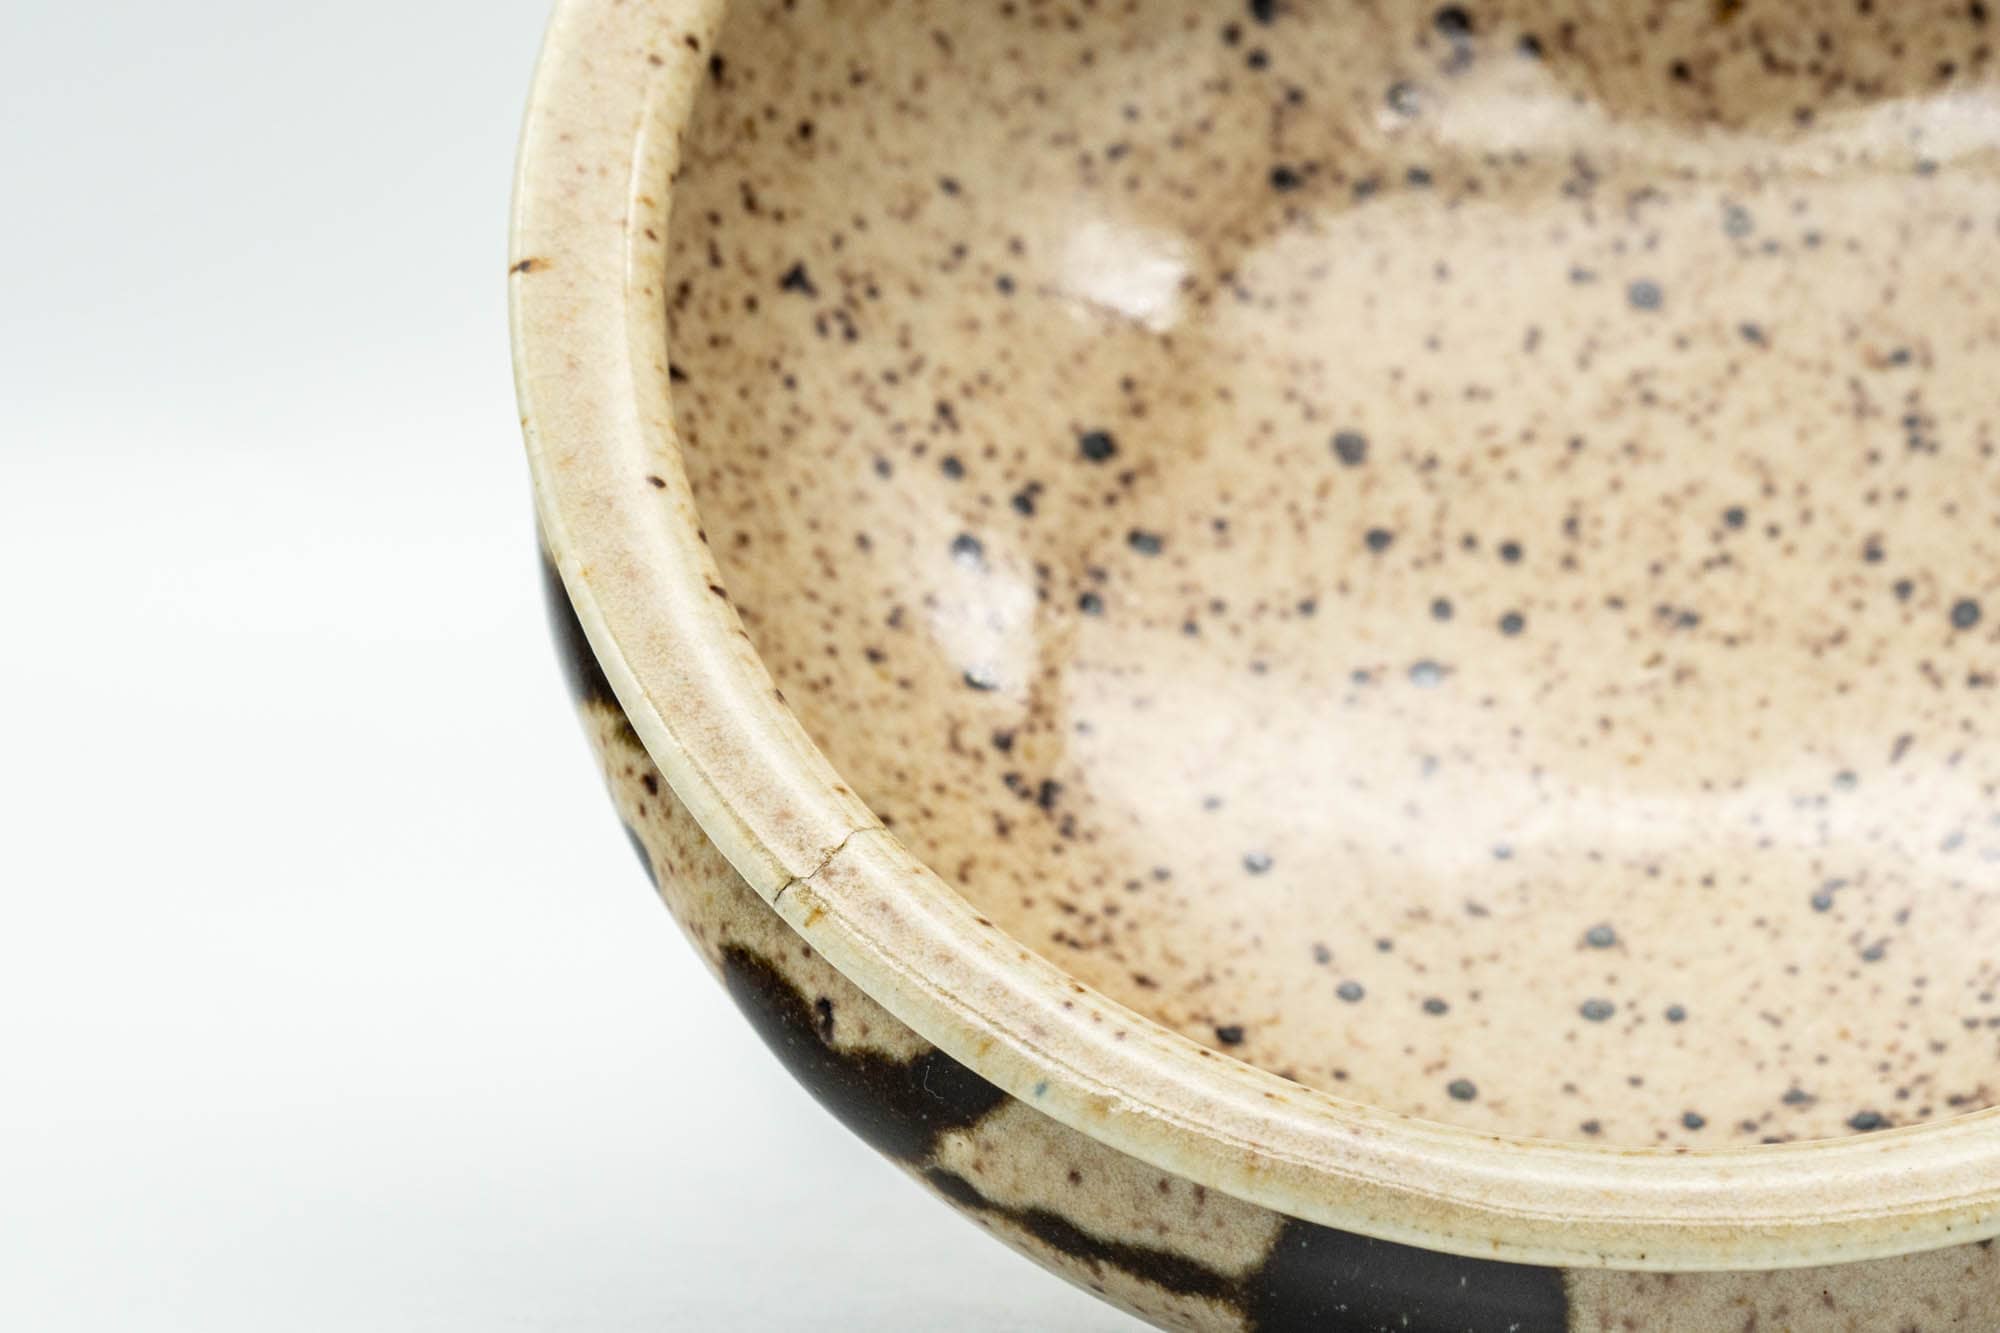 Japanese Kensui - Abstract Beige Speckled Glaze Water Bowl - 250ml - Tezumi